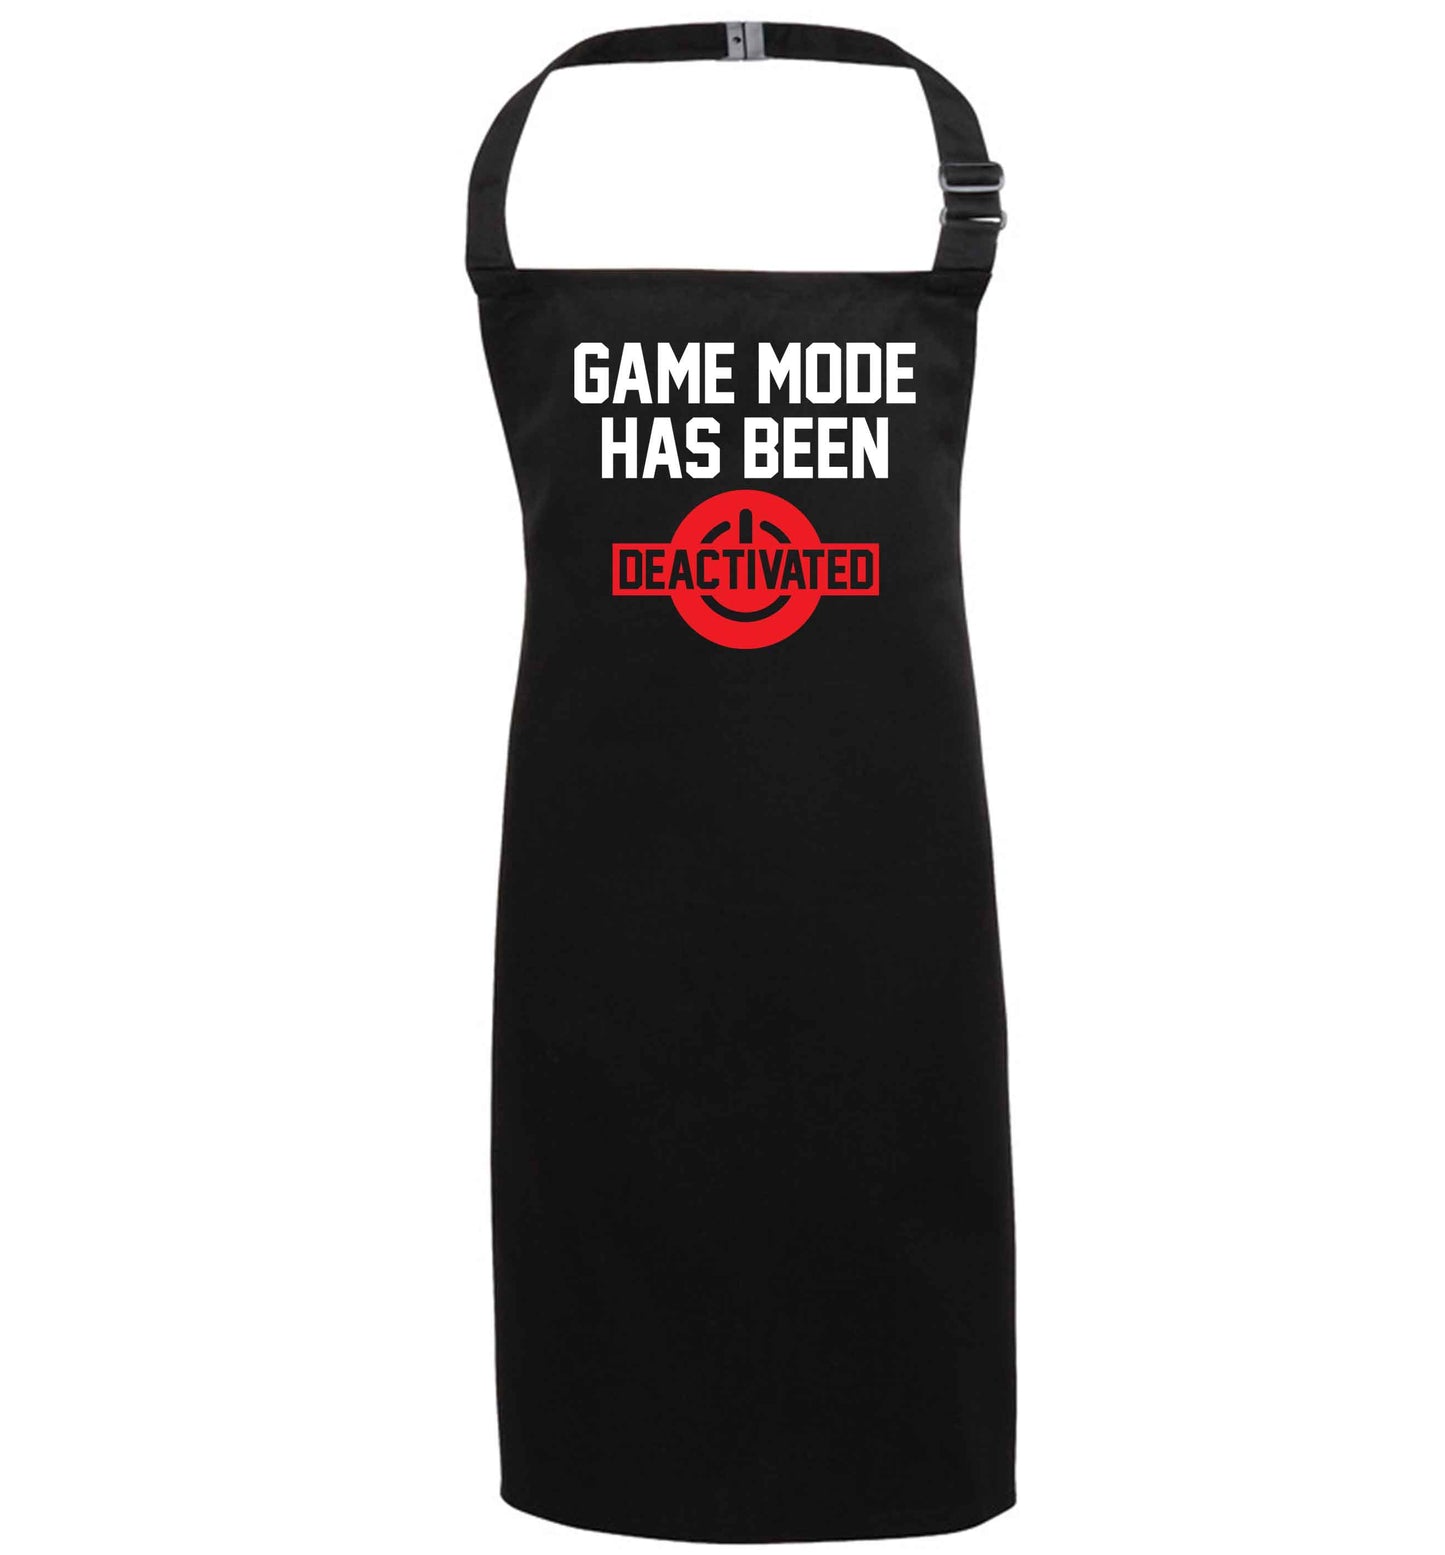 Game Mode Has Been Deactivated black apron 7-10 years